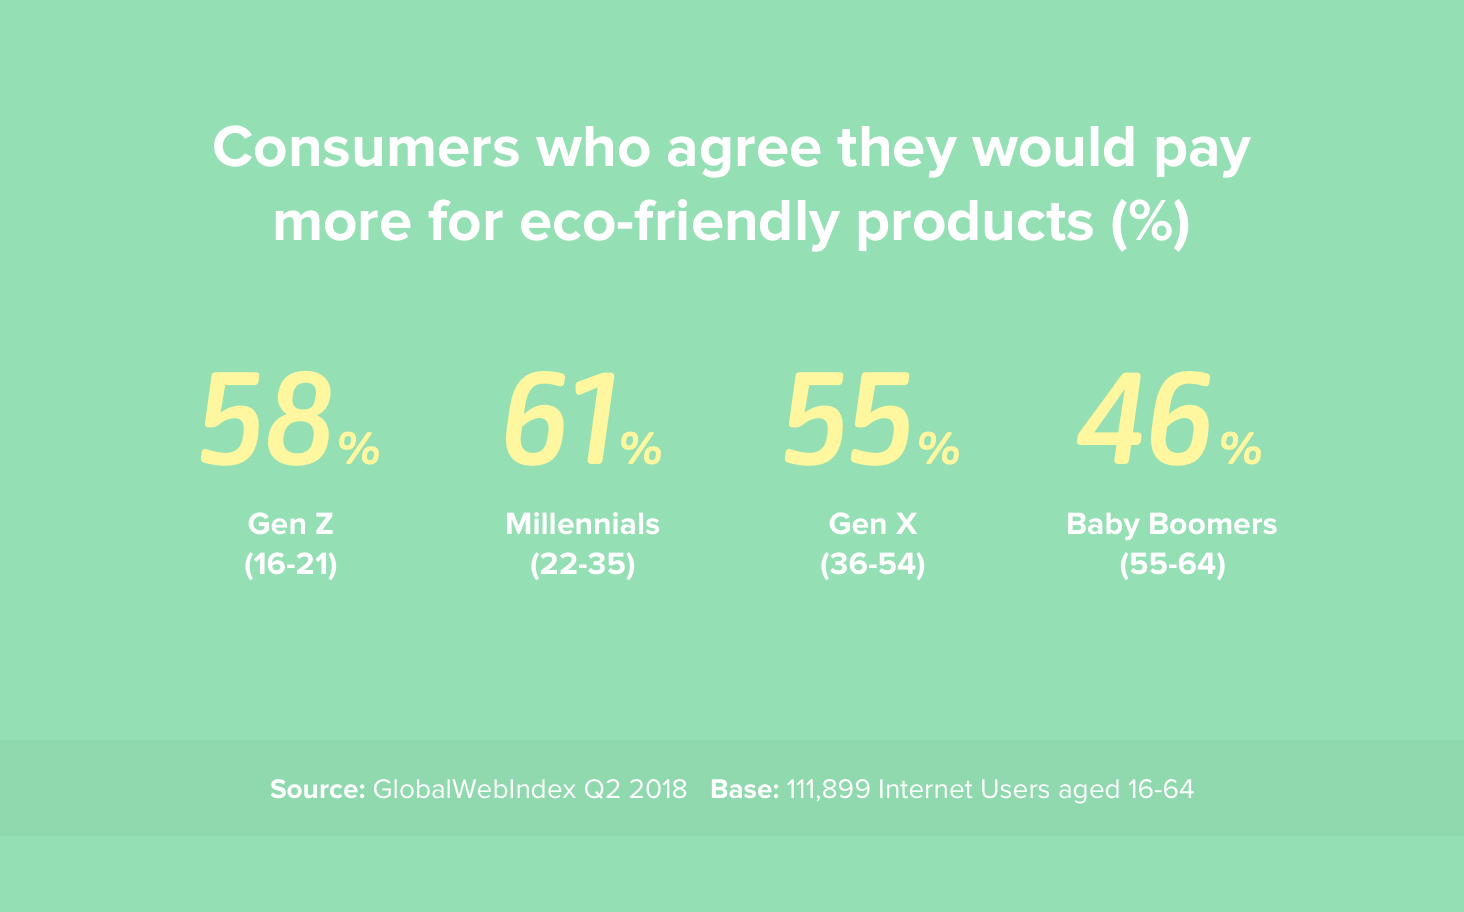 Consumers who would buy eco-friendly products